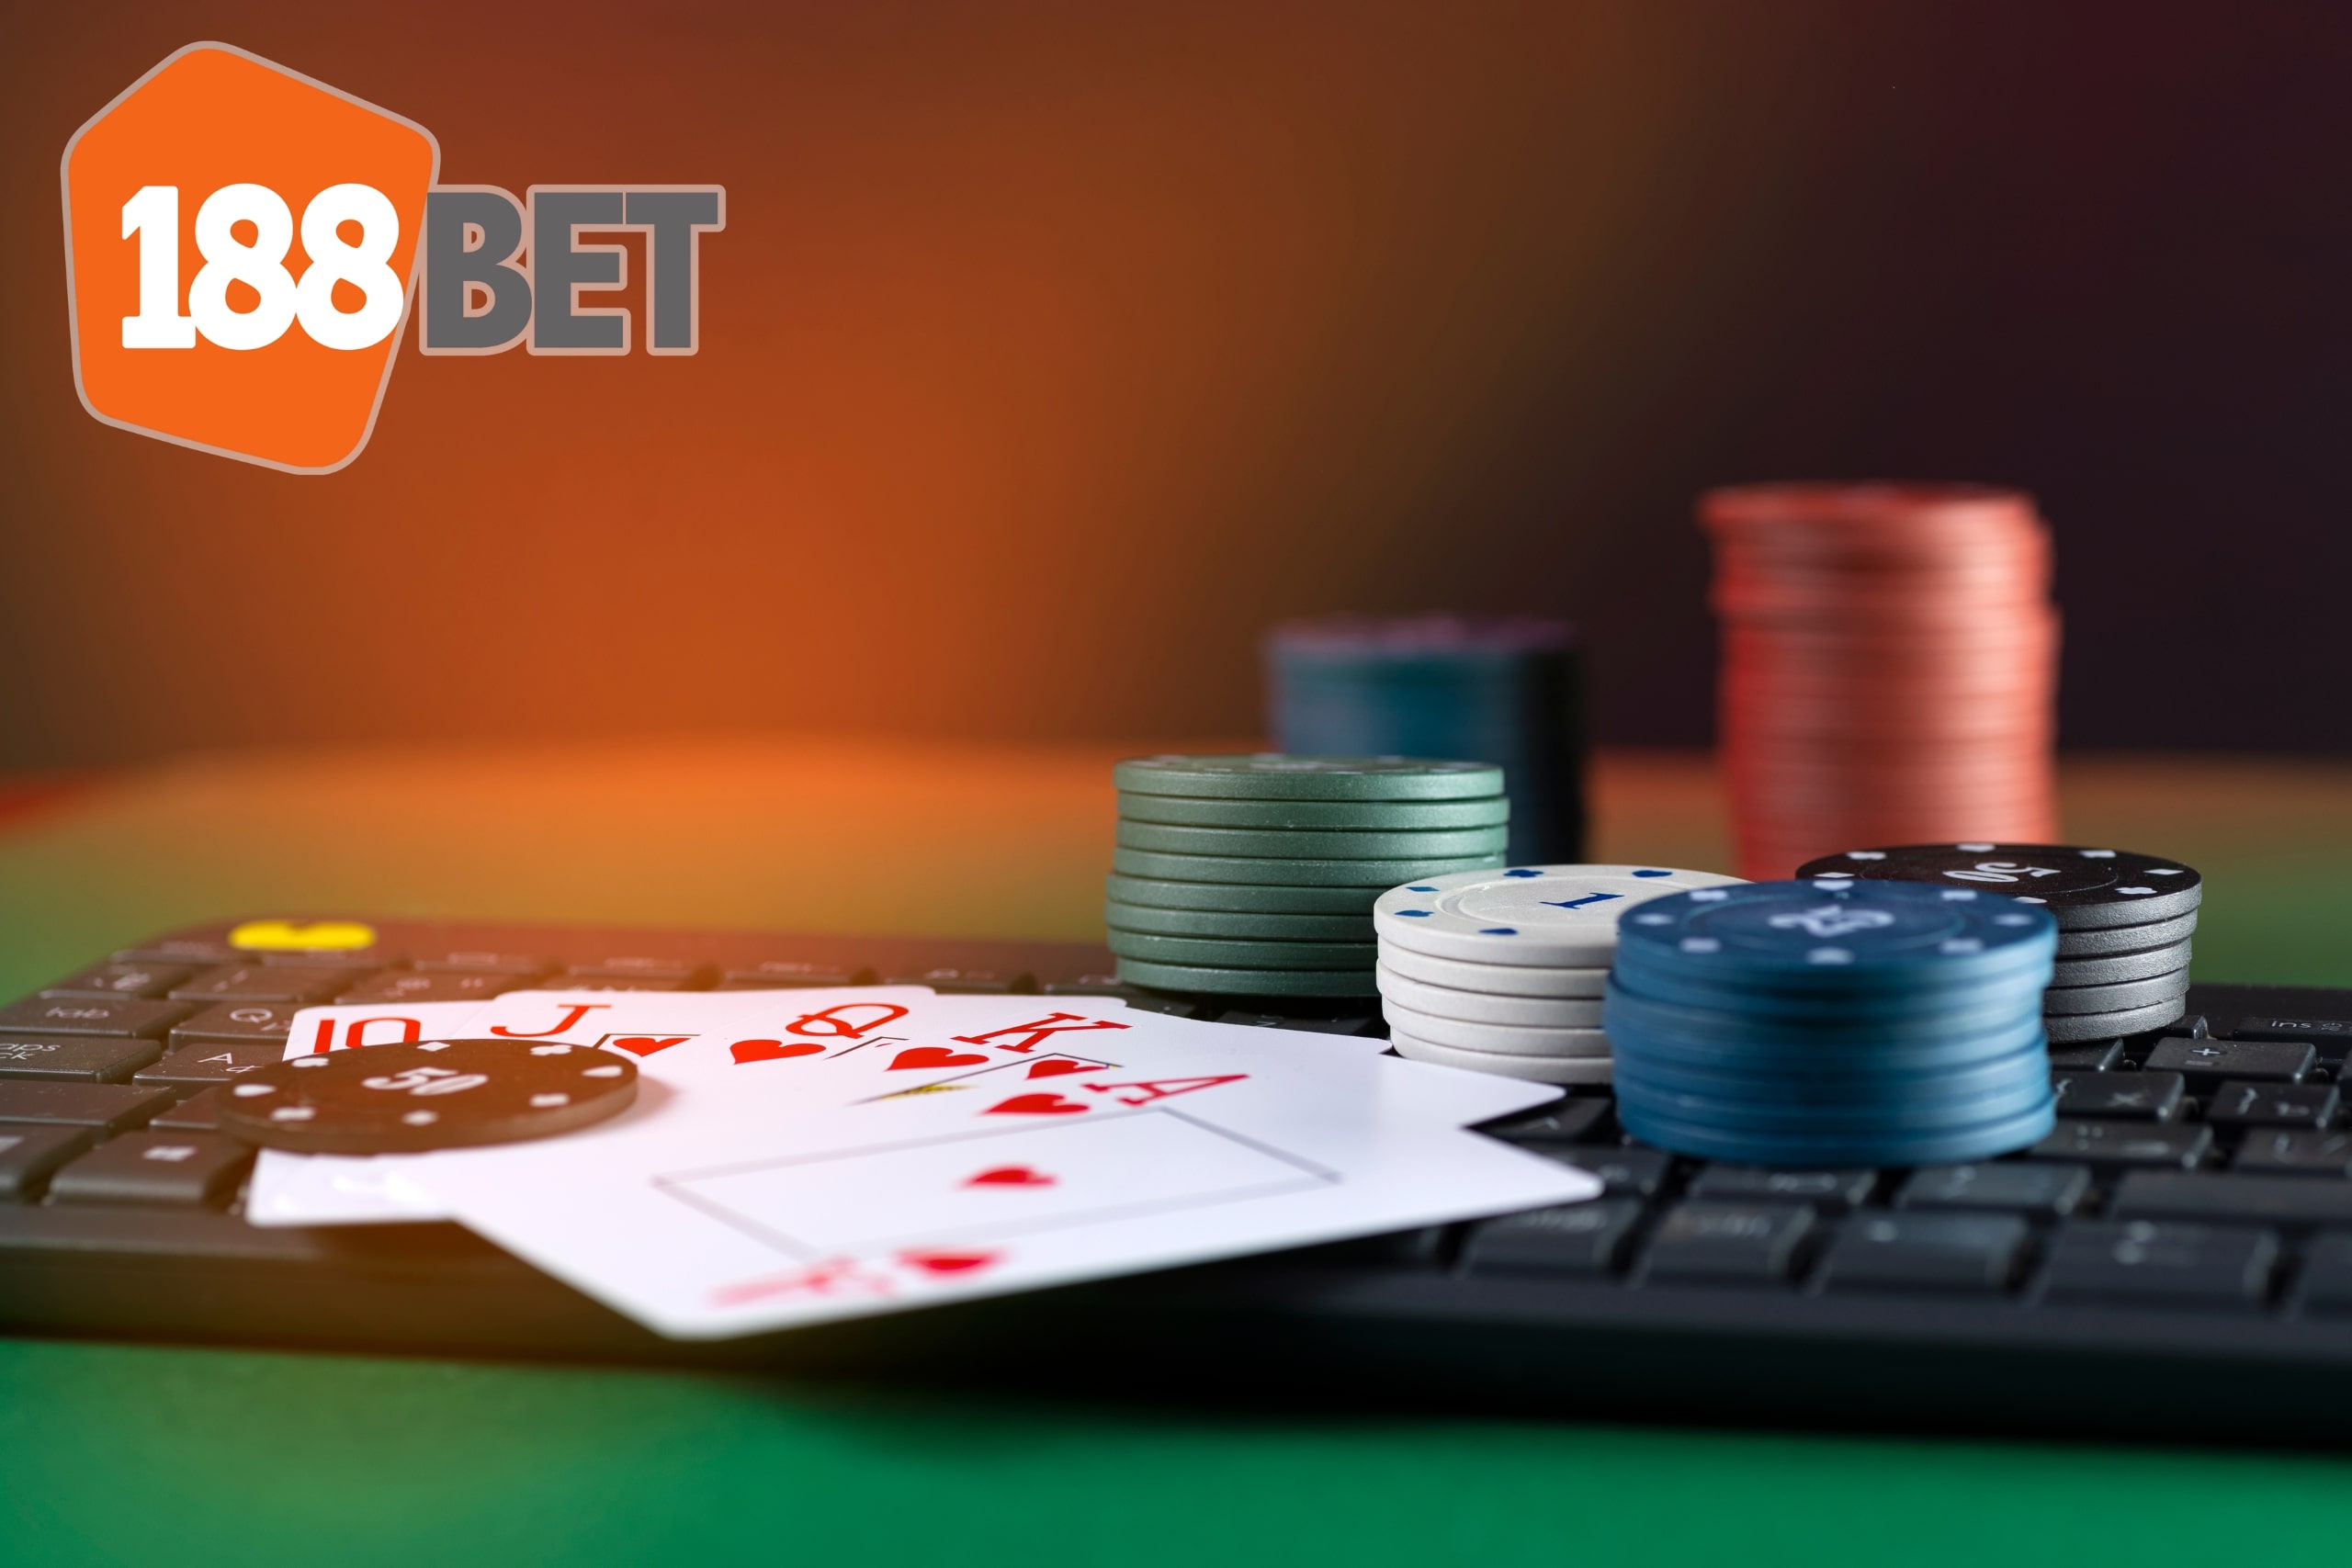 Getting Started With Casino Games At 188bet: Your Entry Point To Online Gaming